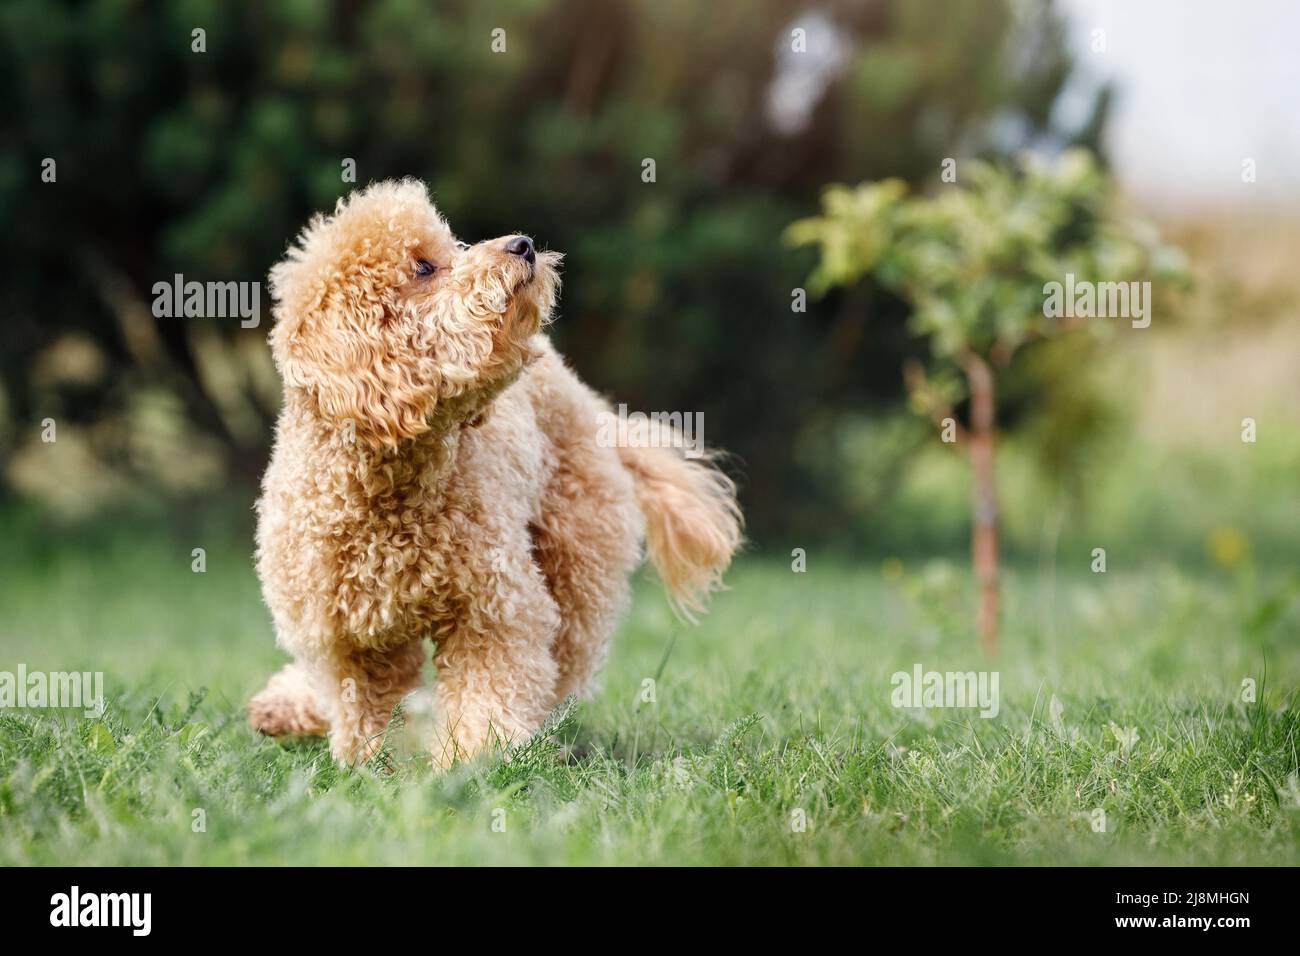 Brown cute poodle puppy running on the grass and looking up. Cute dog and good friend. Stock Photo